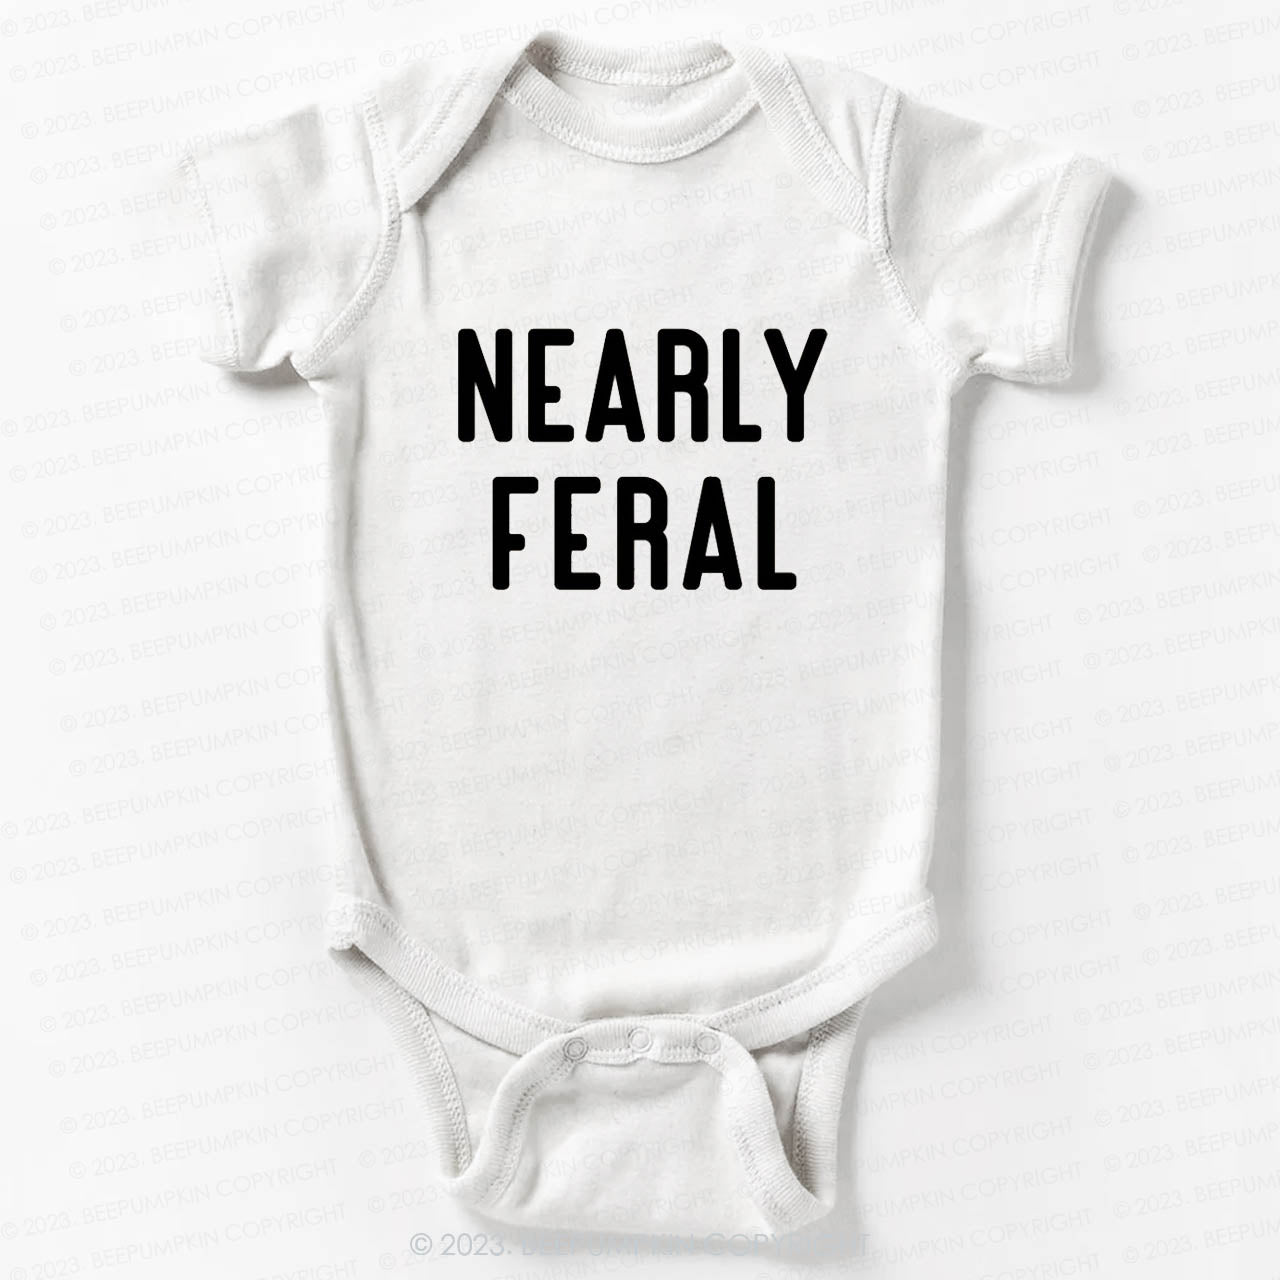 Nearly Feral Funny Bodysuit For Baby